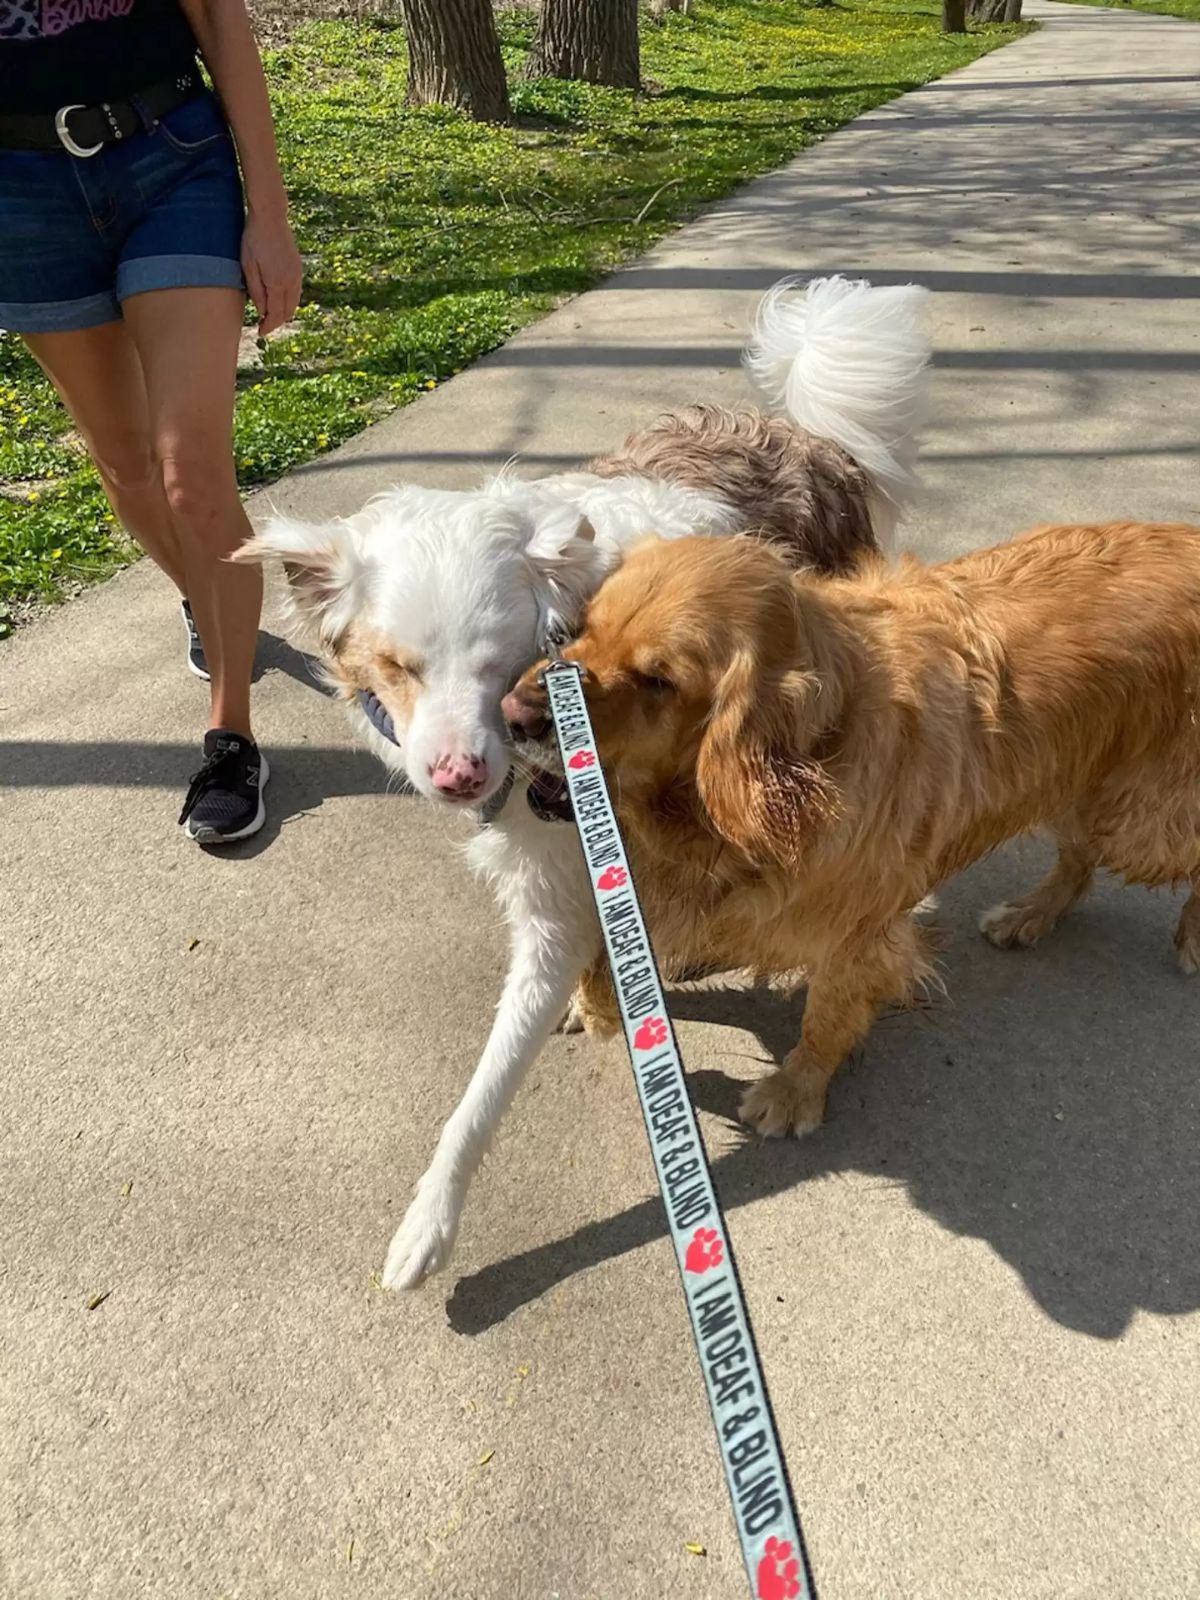 golden retriever standing very close to fluffy white blind dog and touching its nose to the white dog's face